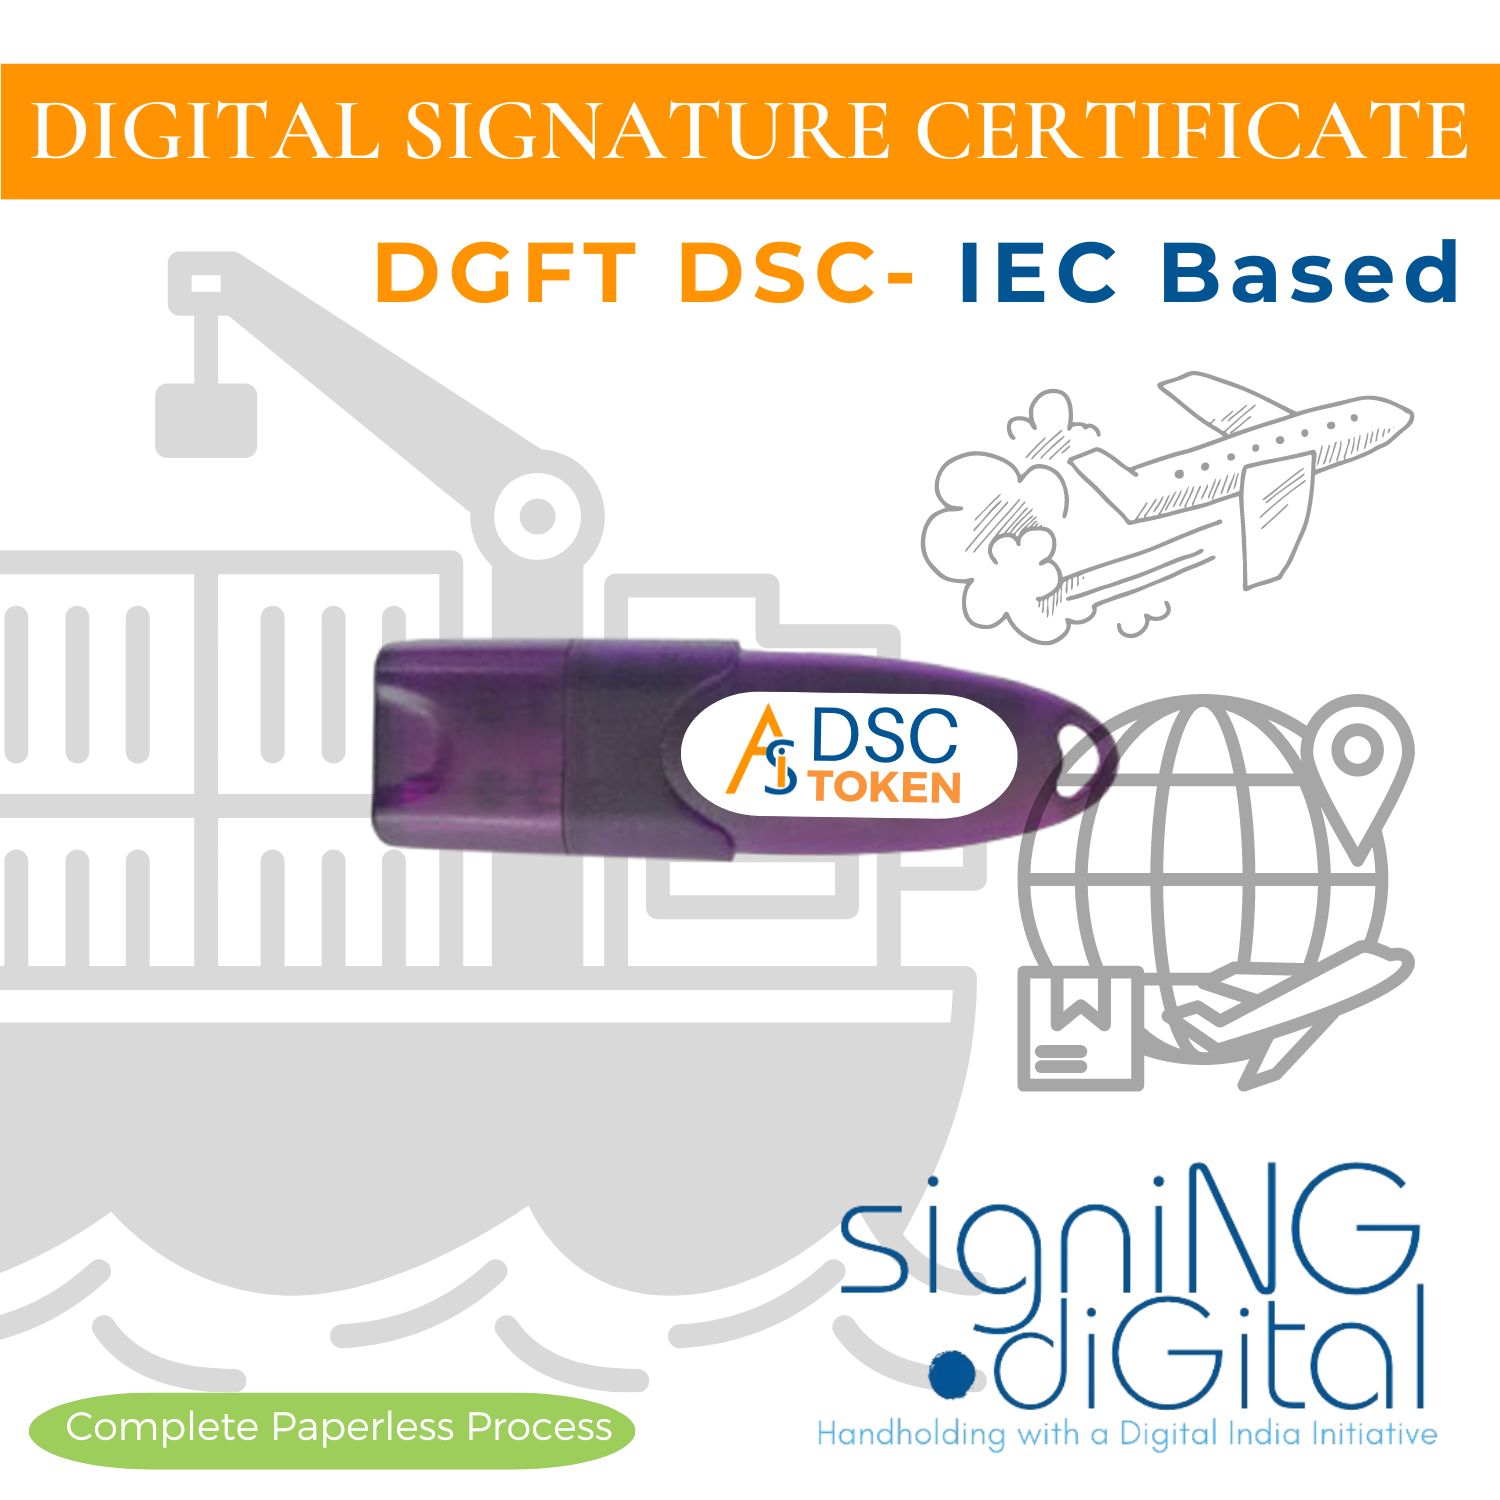 A digital signature certificate for import-export and customs. Boost your business with secure and hassle-free document signing for international trade